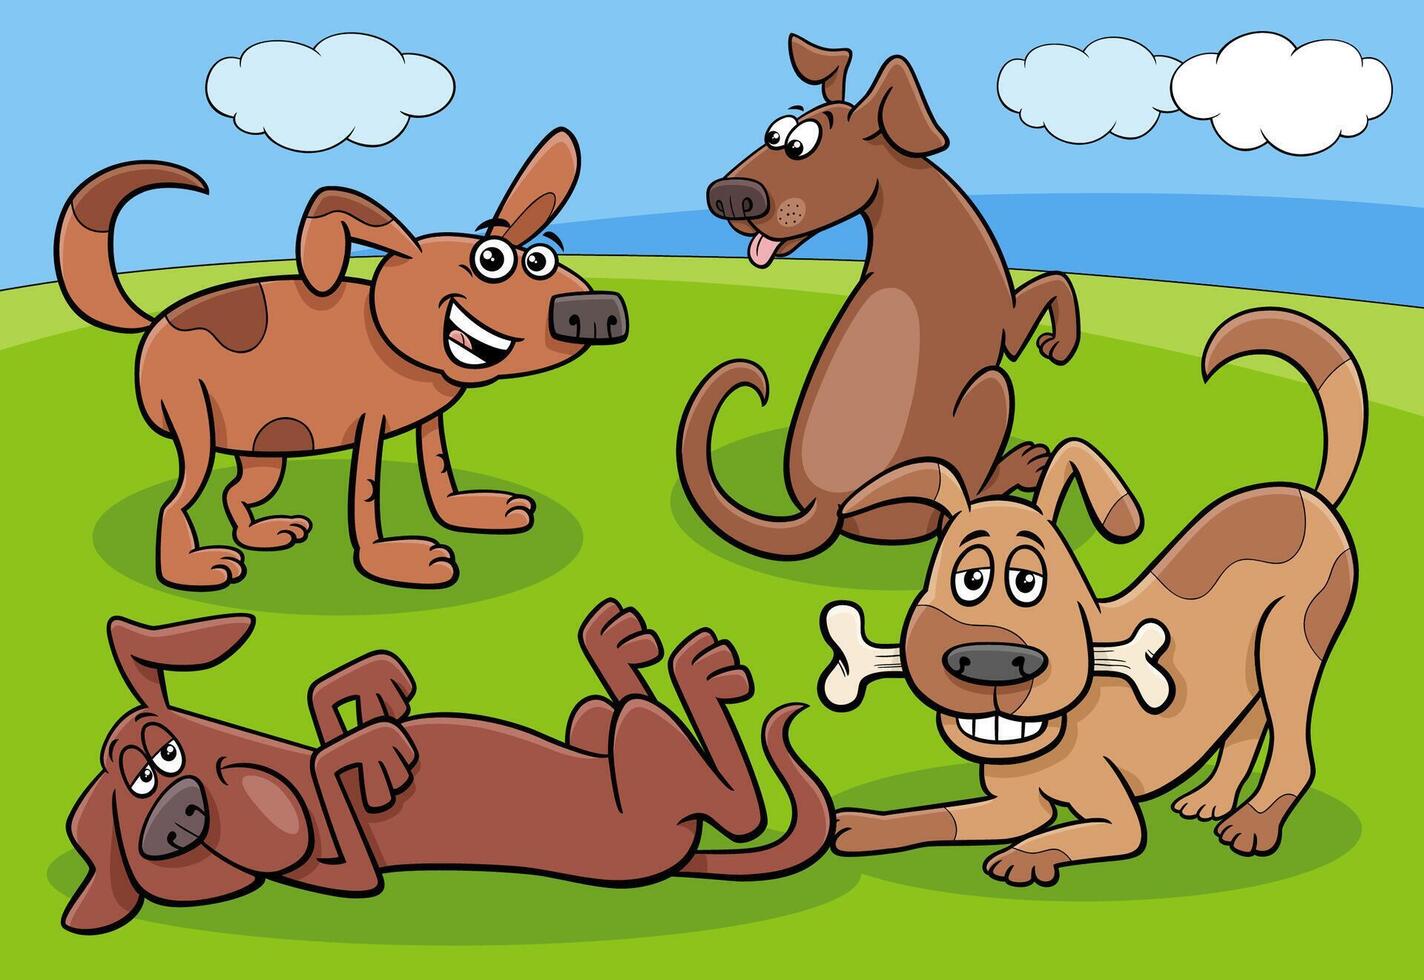 cartoon dogs and puppies characters group in the meadow vector